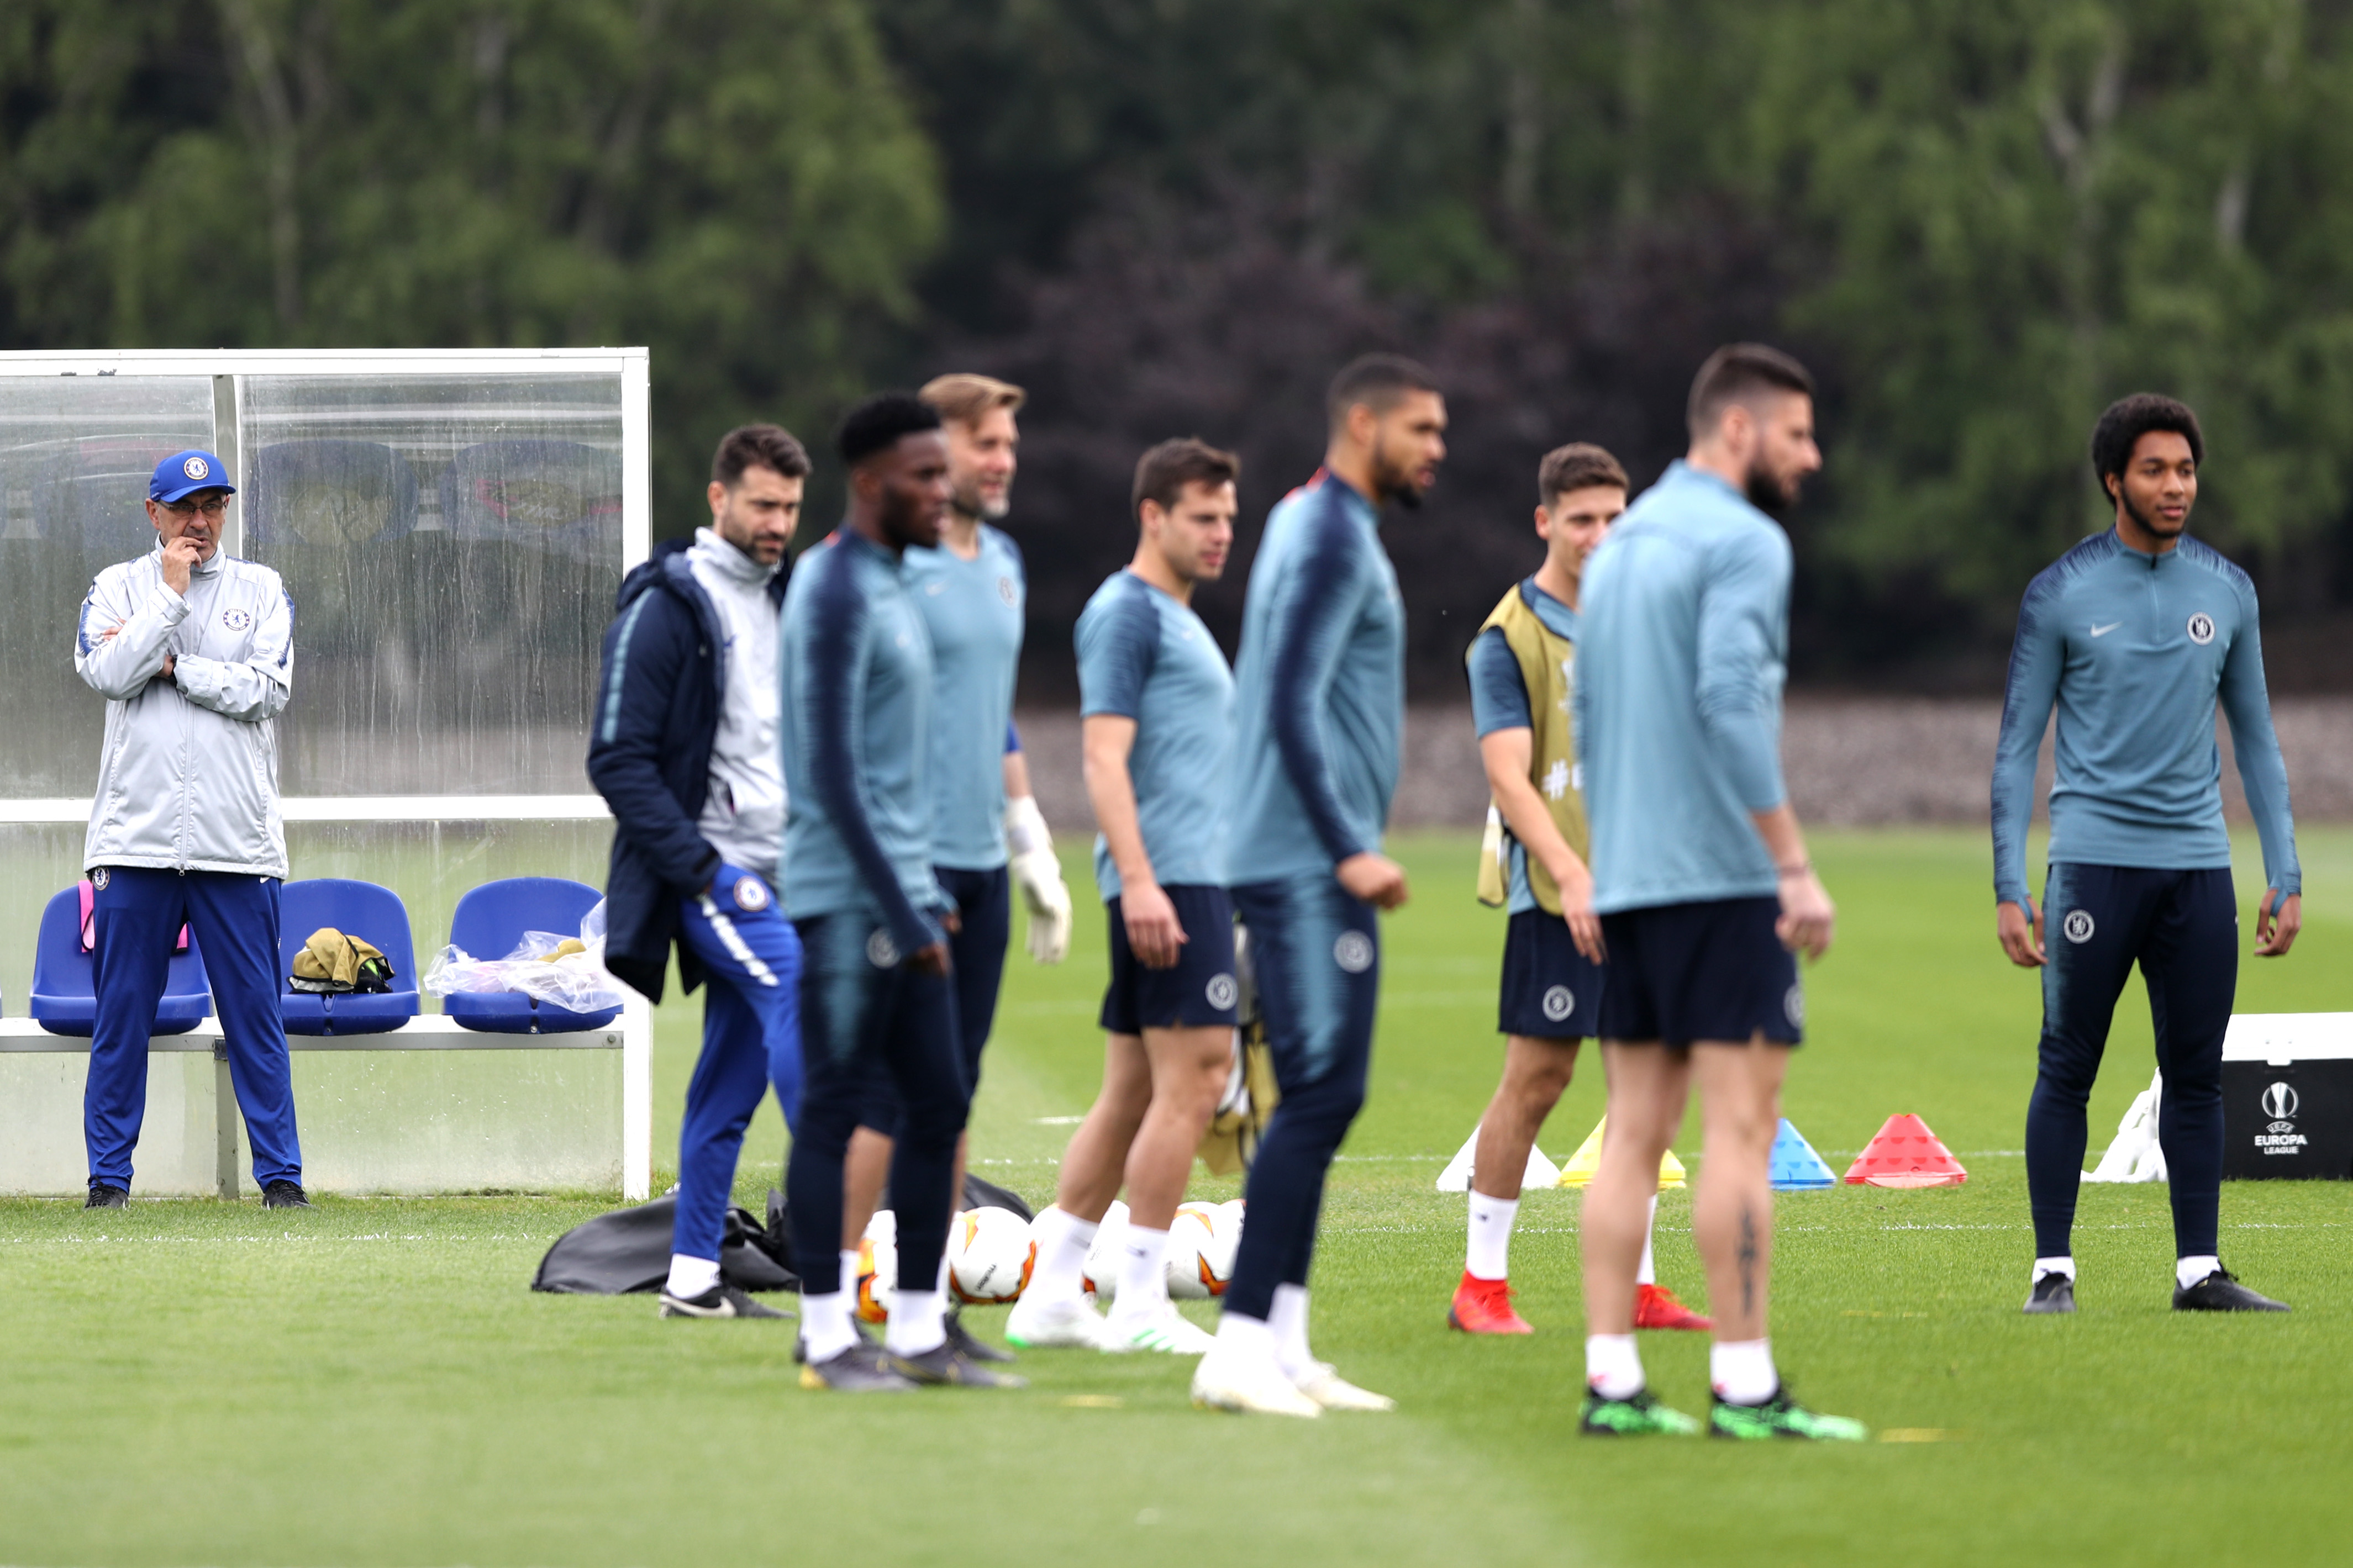 COBHAM, ENGLAND - MAY 01: Maurizio Sarri, Manager of Chelsea watches on during a Chelsea training session ahead of their UEFA Europa League semi-final first leg match against Eintracht Frankfurt. At Chelsea Training Ground on May 01, 2019 in Cobham, England. (Photo by Bryn Lennon/Getty Images)